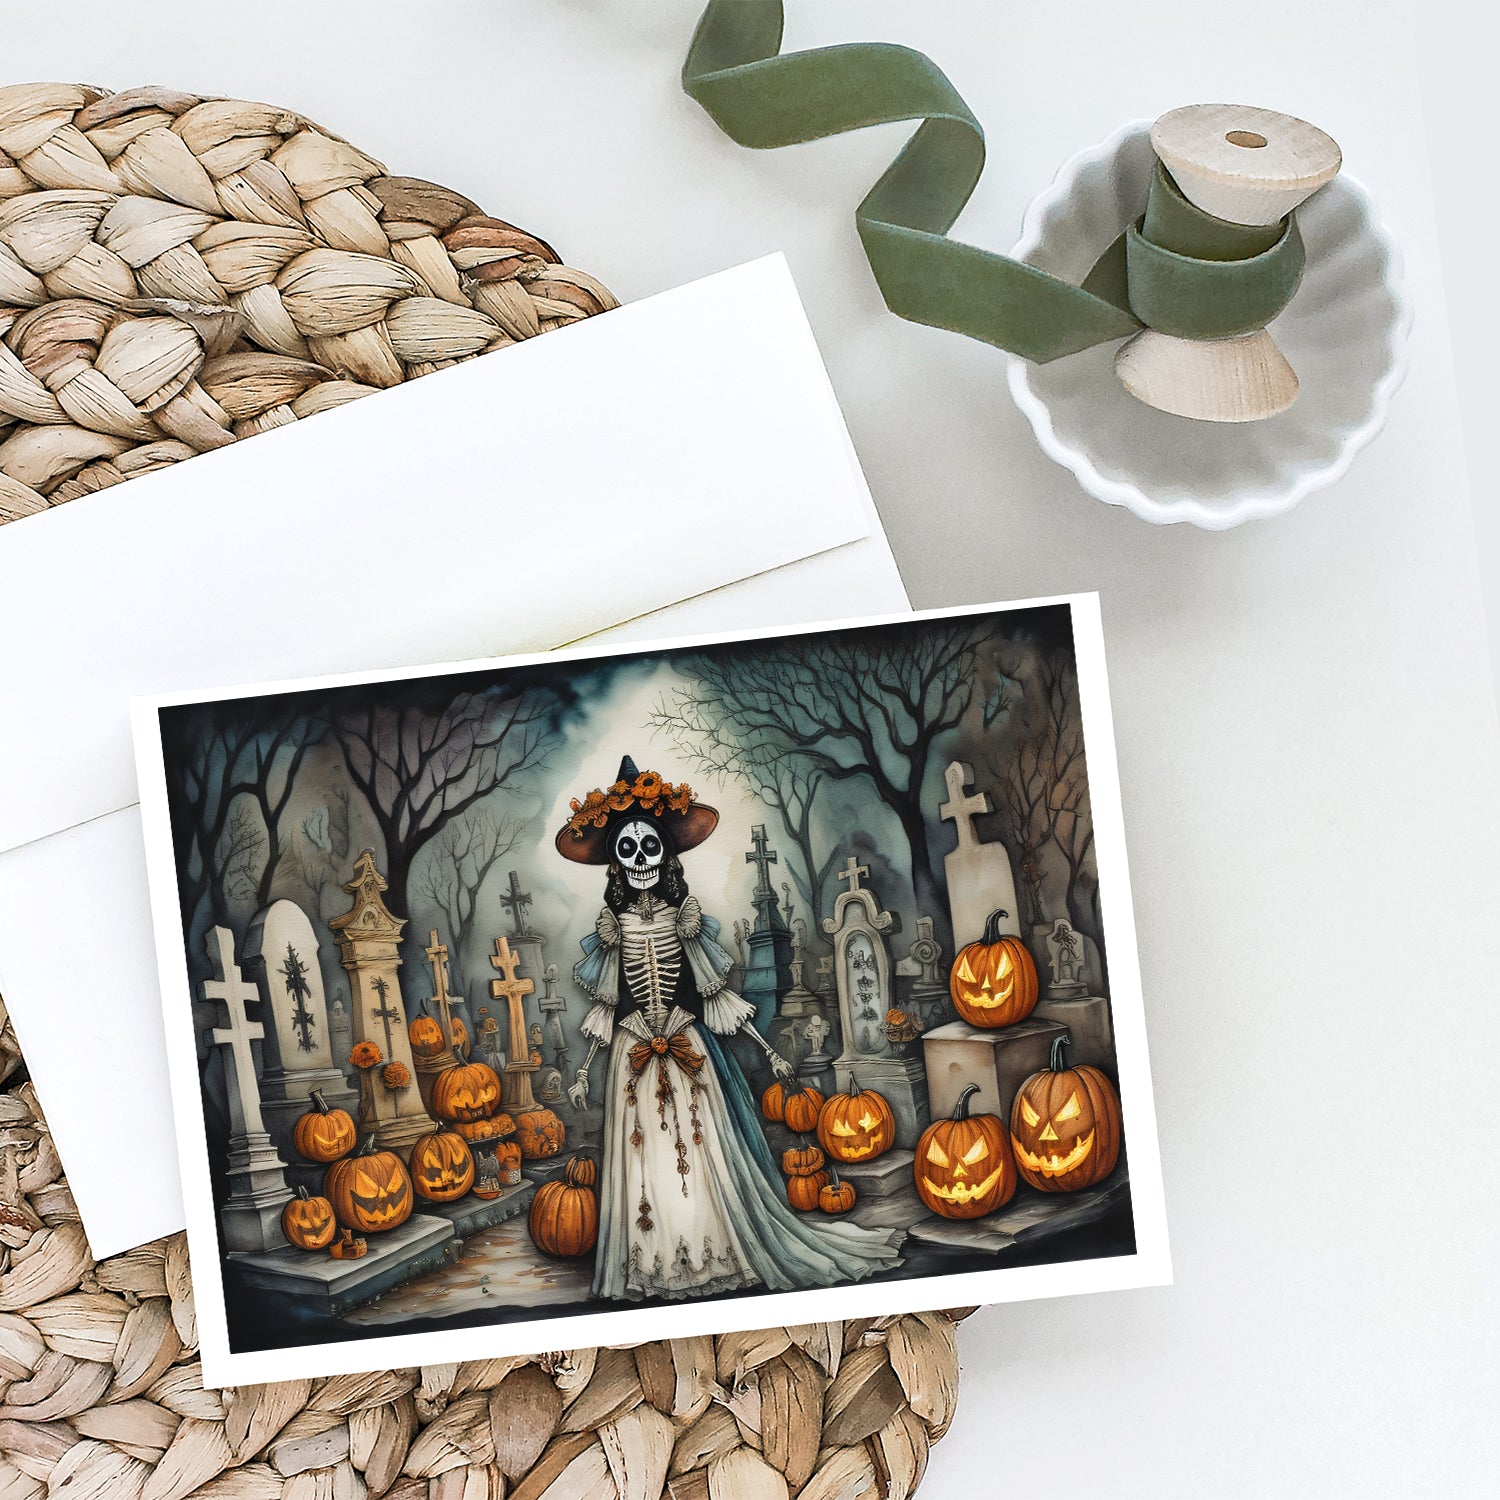 Buy this La Catrina Skeleton Spooky Halloween Greeting Cards and Envelopes Pack of 8